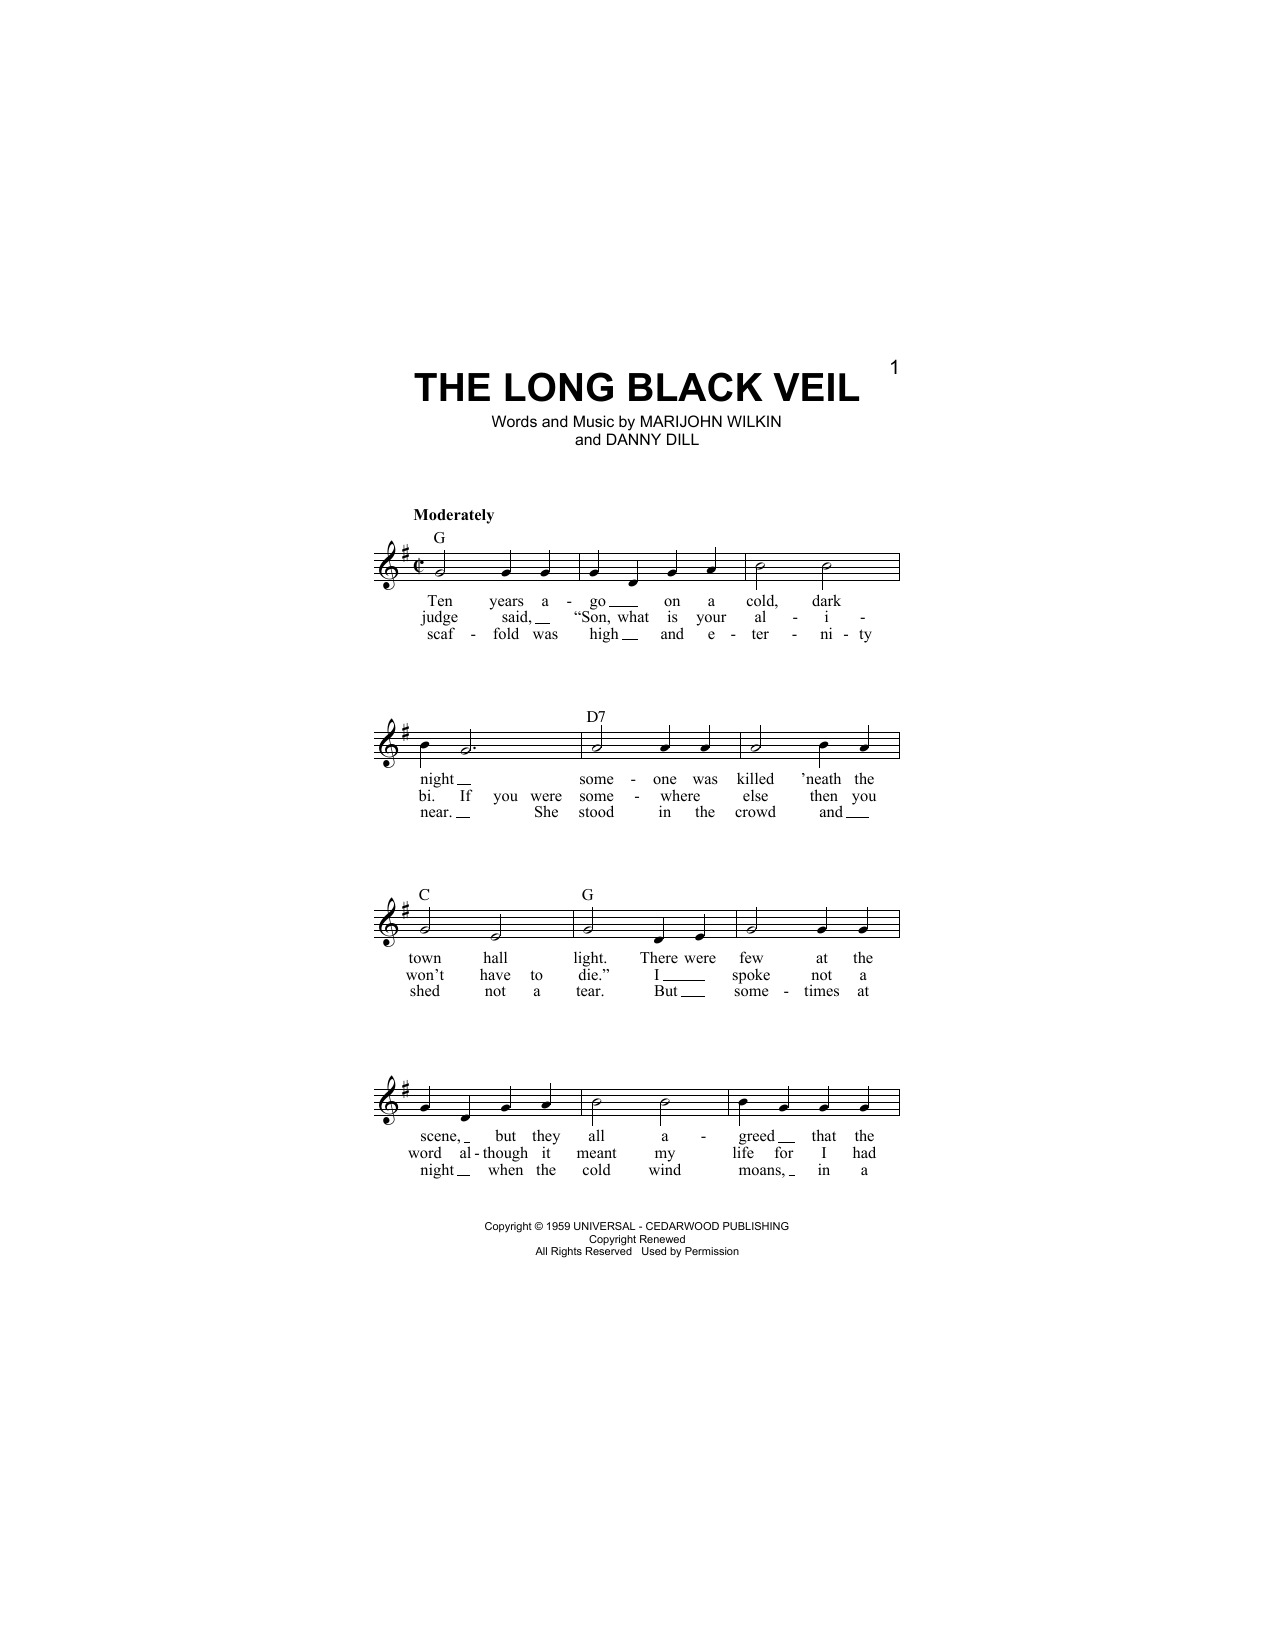 Download Lefty Frizzell The Long Black Veil Sheet Music